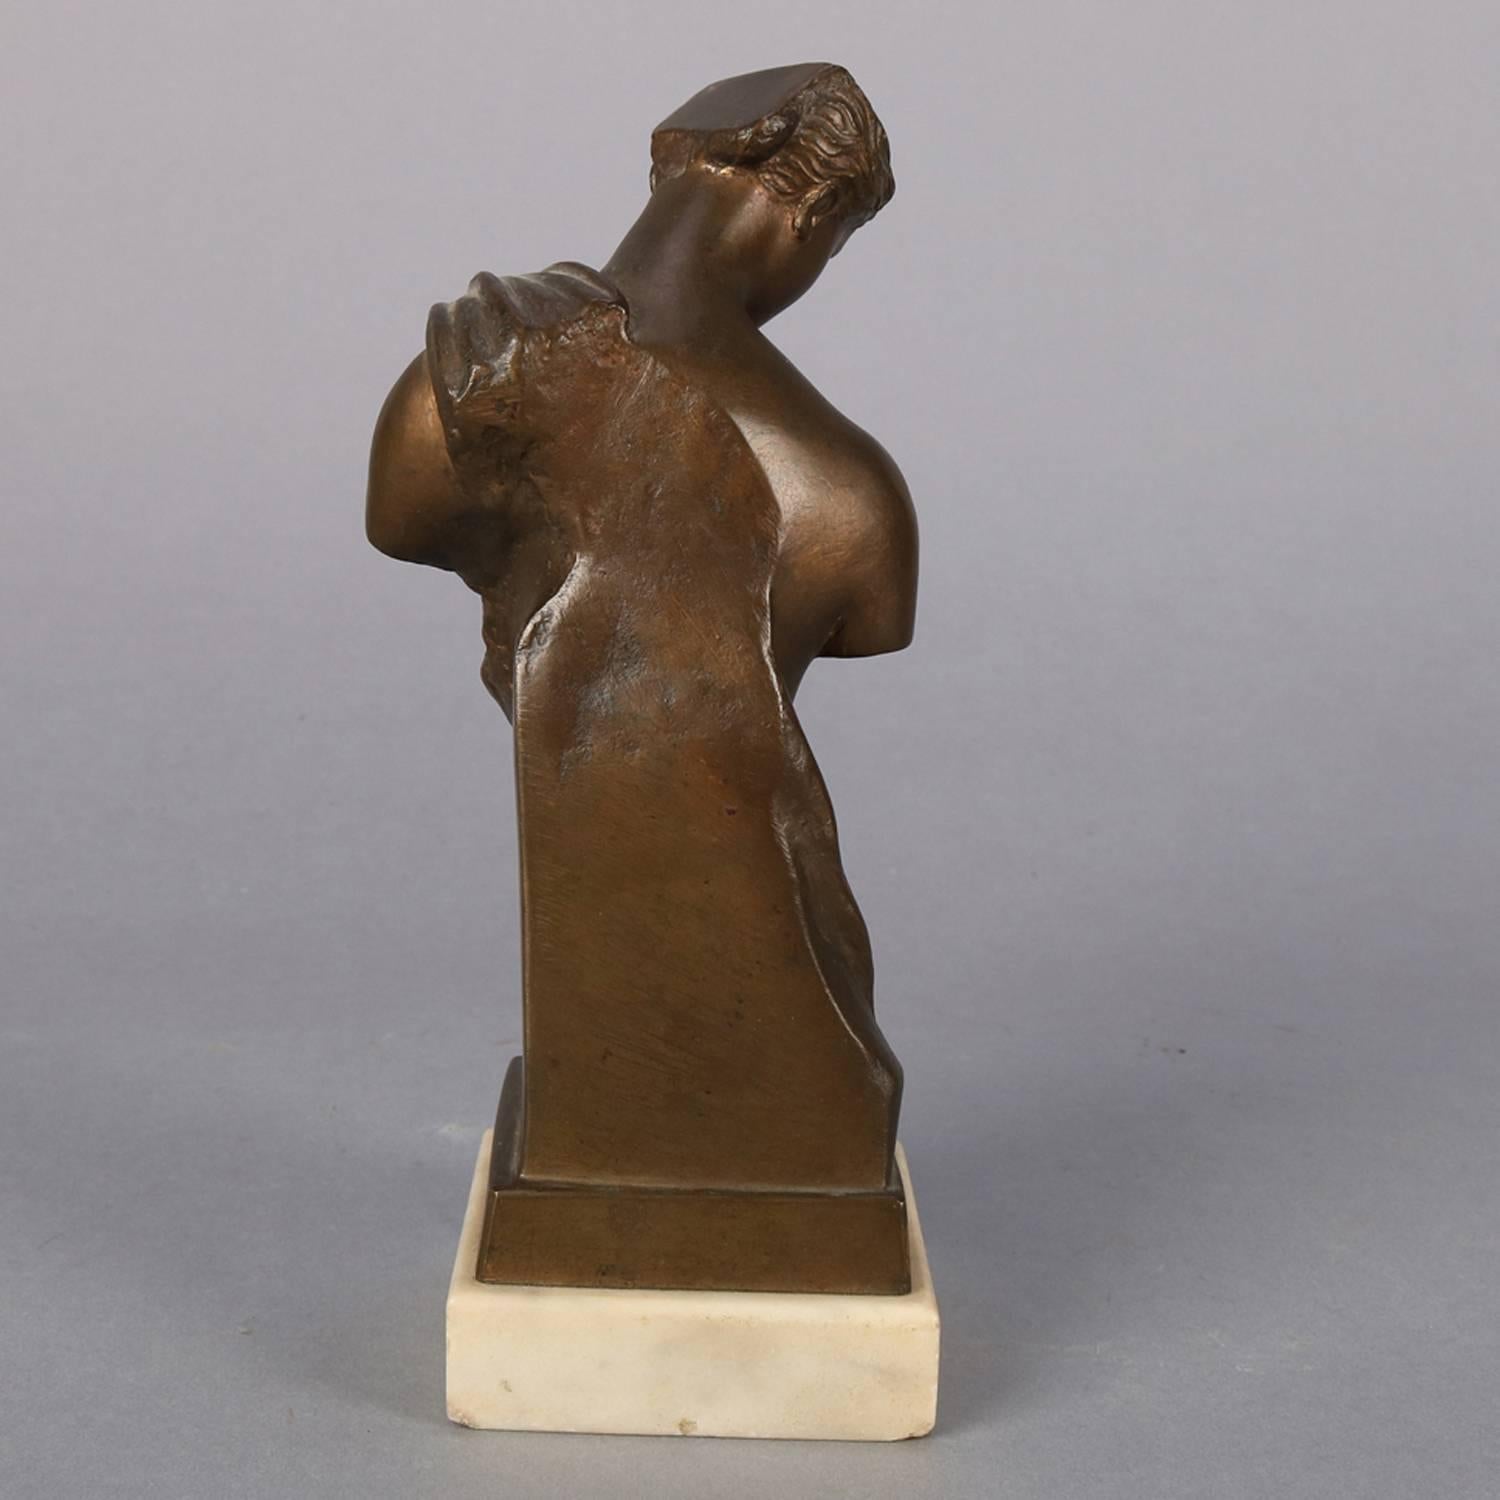 19th Century Antique Classical 3/4 Partial Nude Sculpture Portrait of Woman, Dated 1890